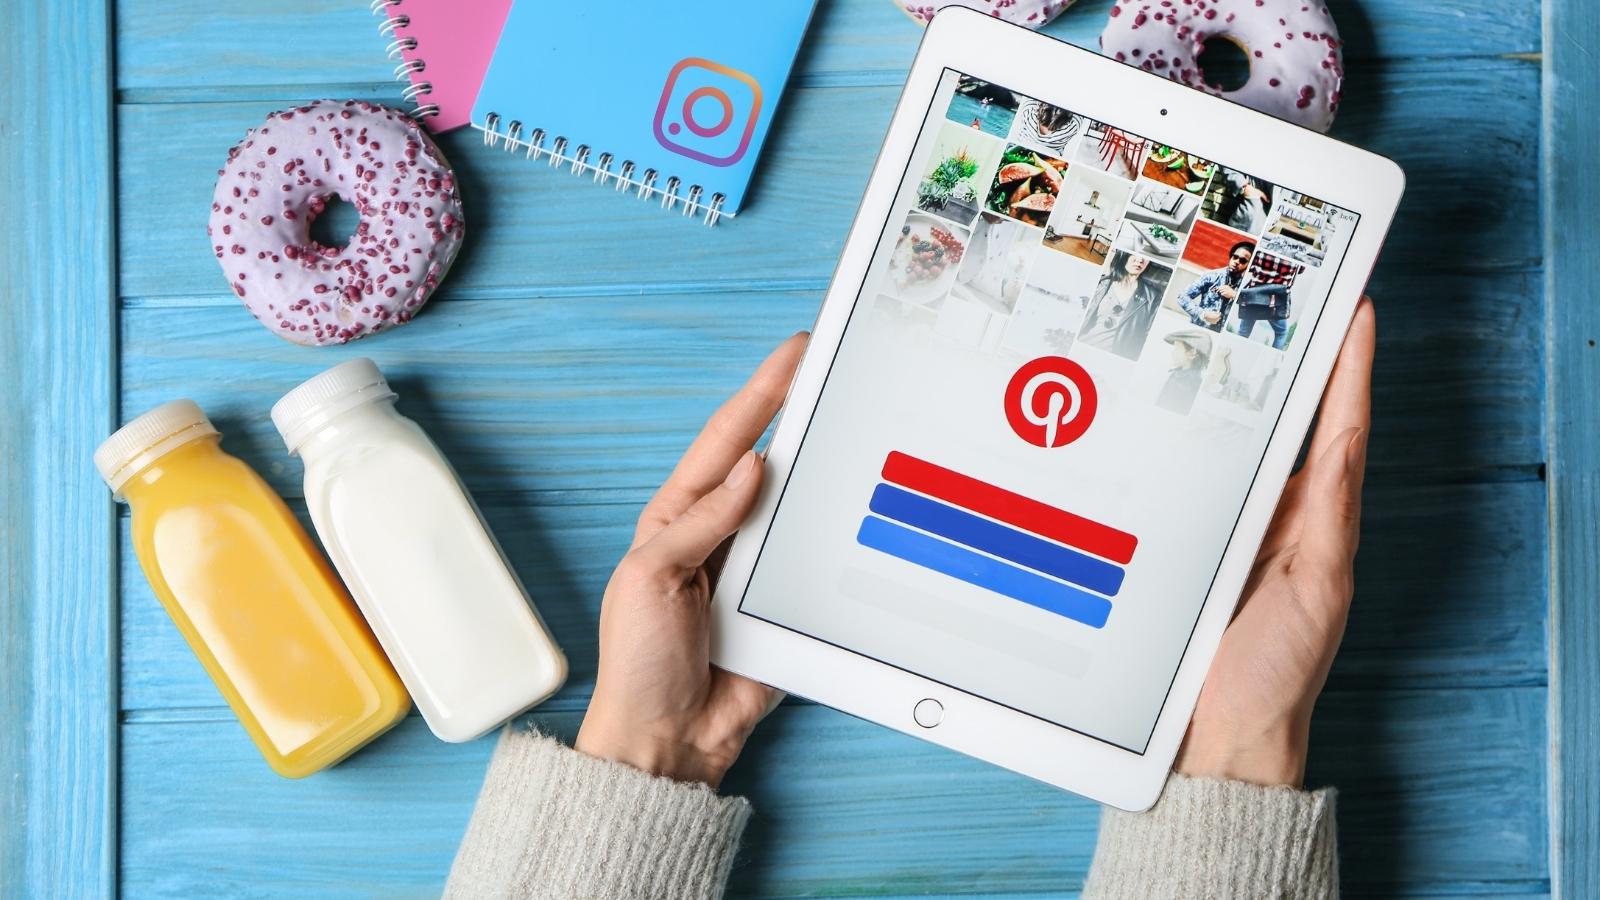 How to automate Pinterest pins!